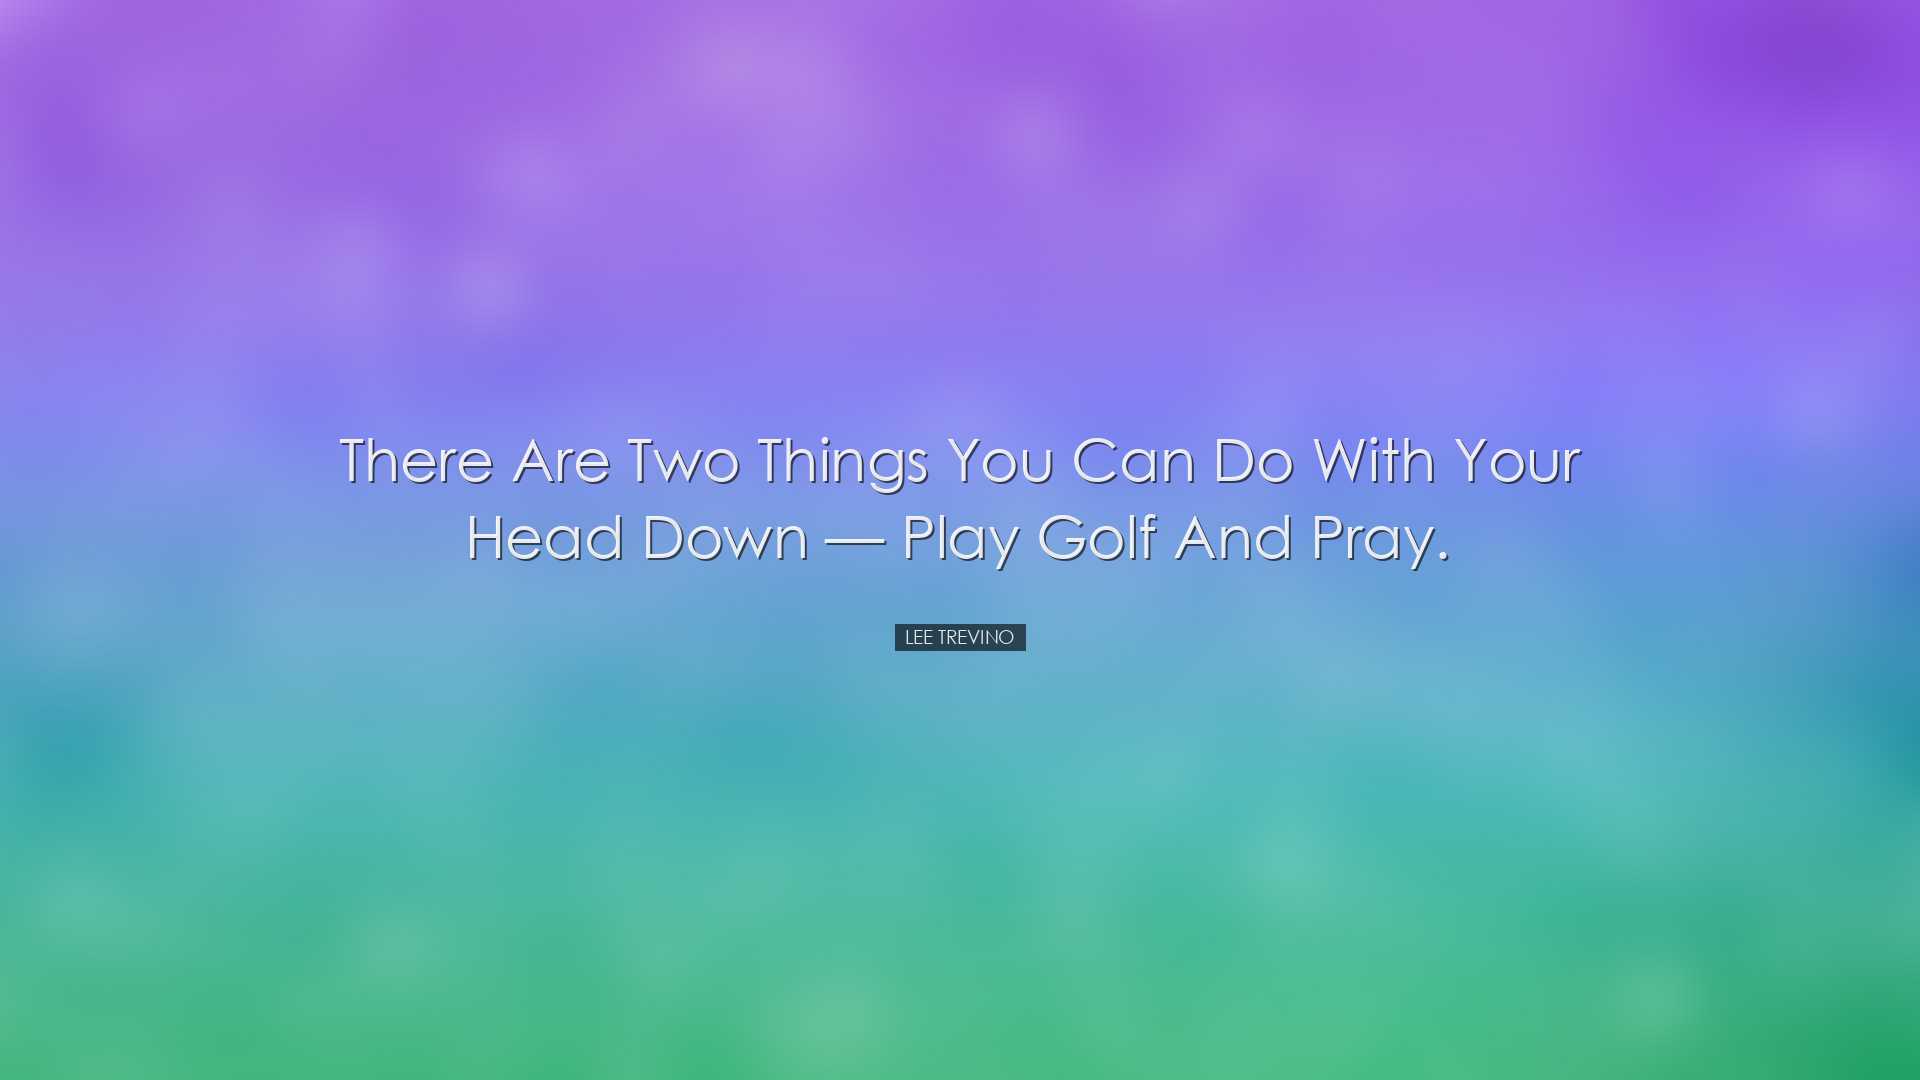 There are two things you can do with your head down â€” play